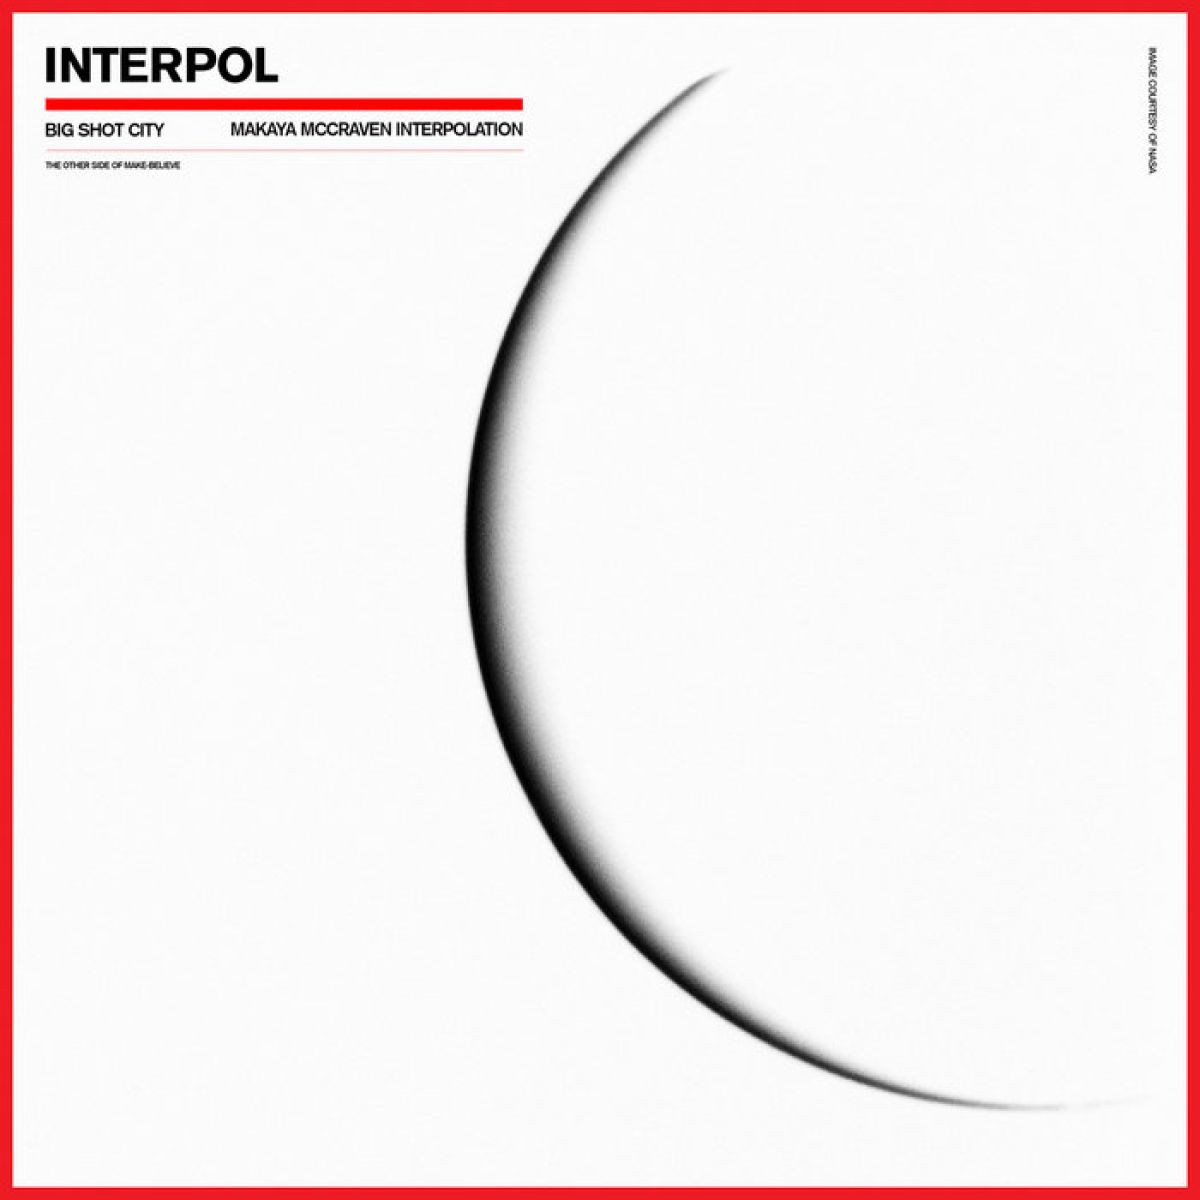 Interpol tease ‘Interpolations’ project with new version of ‘Big Shot City’